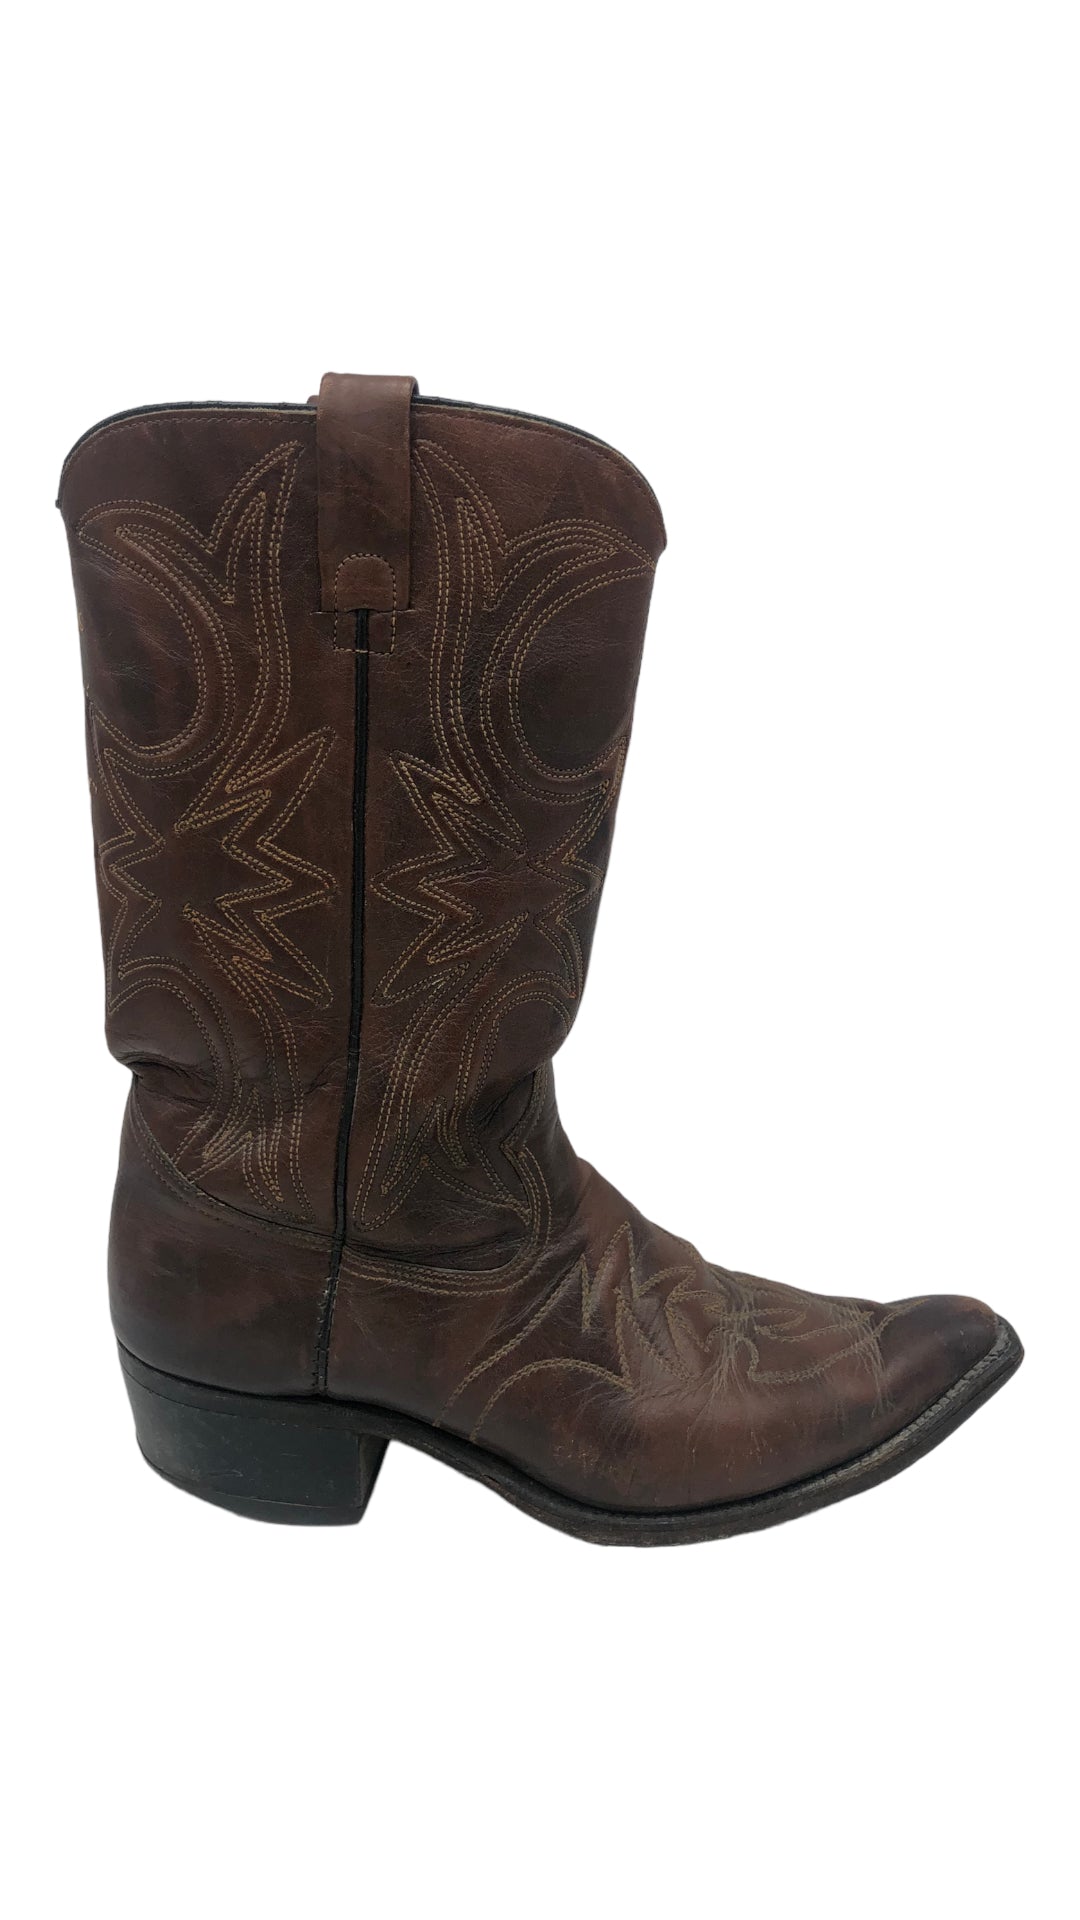 Brown Snip Toe Stitched Texas Imperial Boots Sz 9M/10.5W